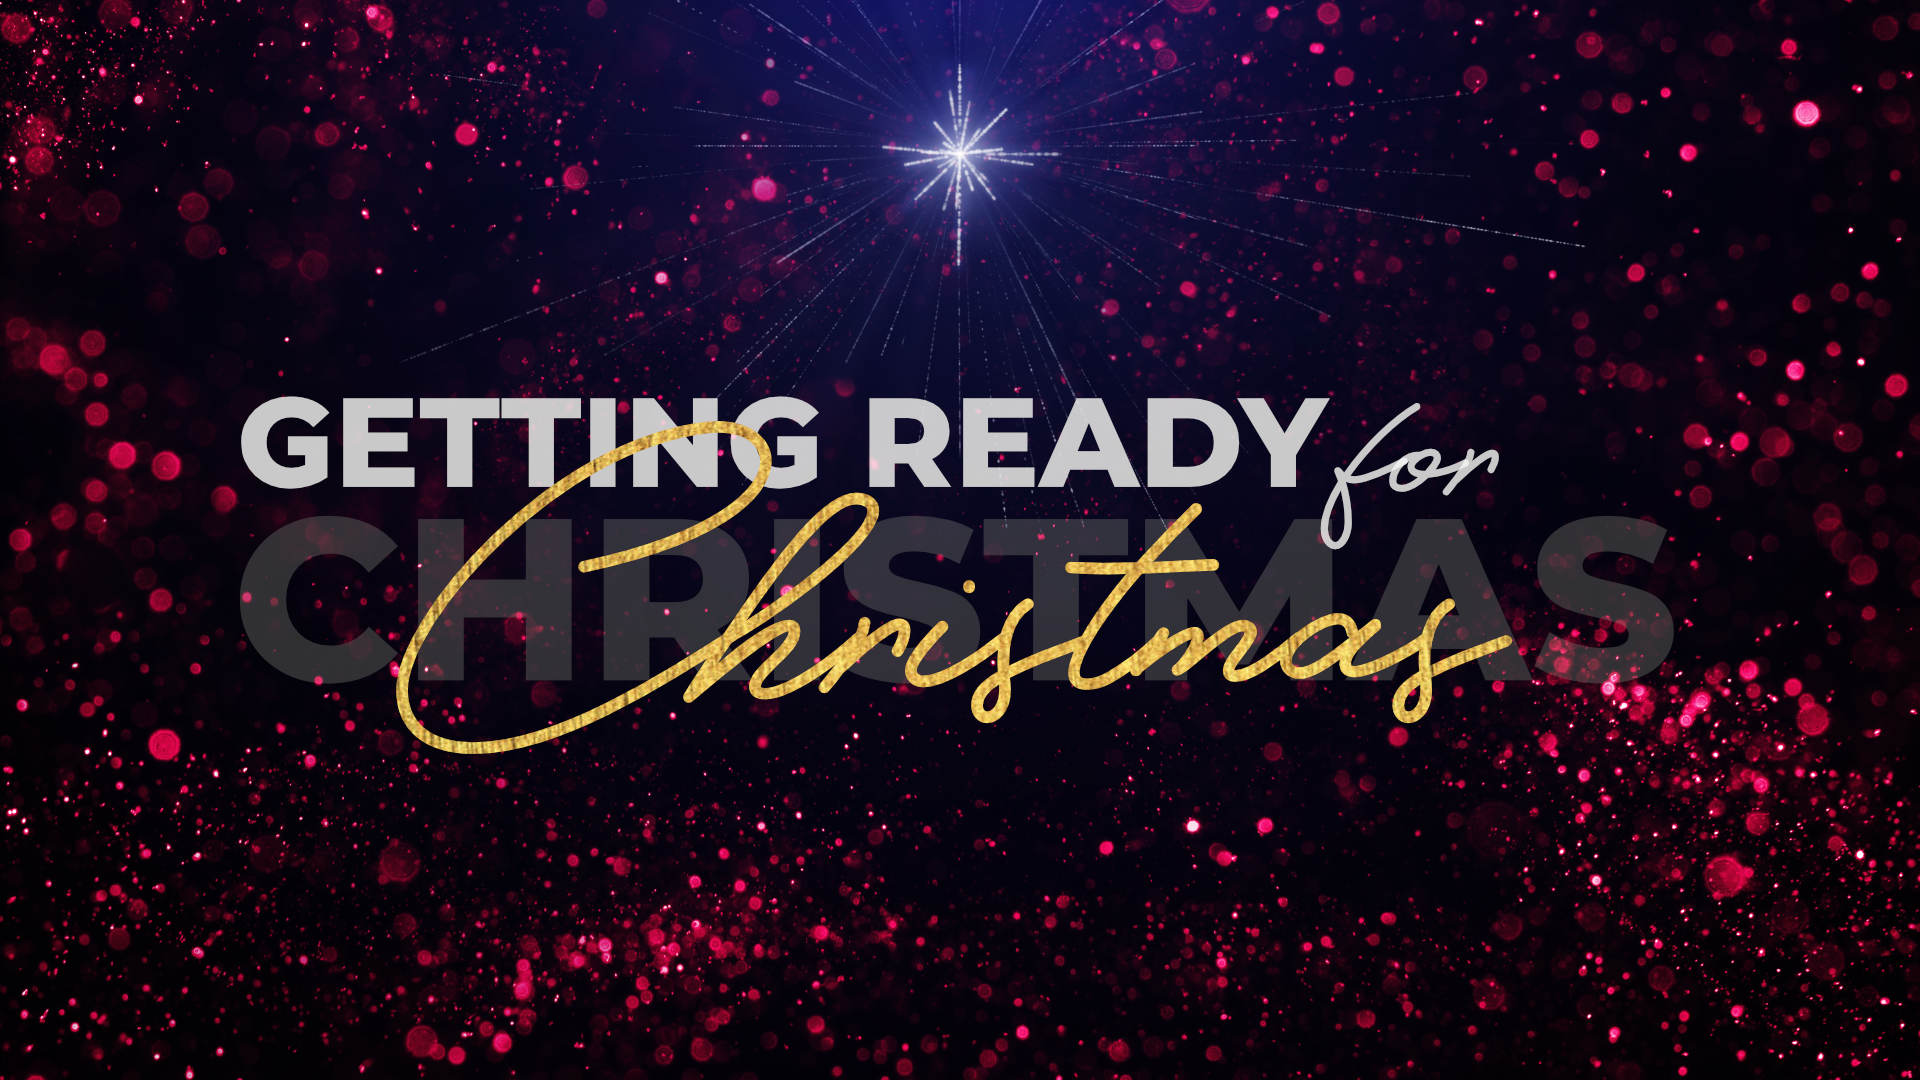 Getting Ready for Christmas • Dec. 2-23, 2018